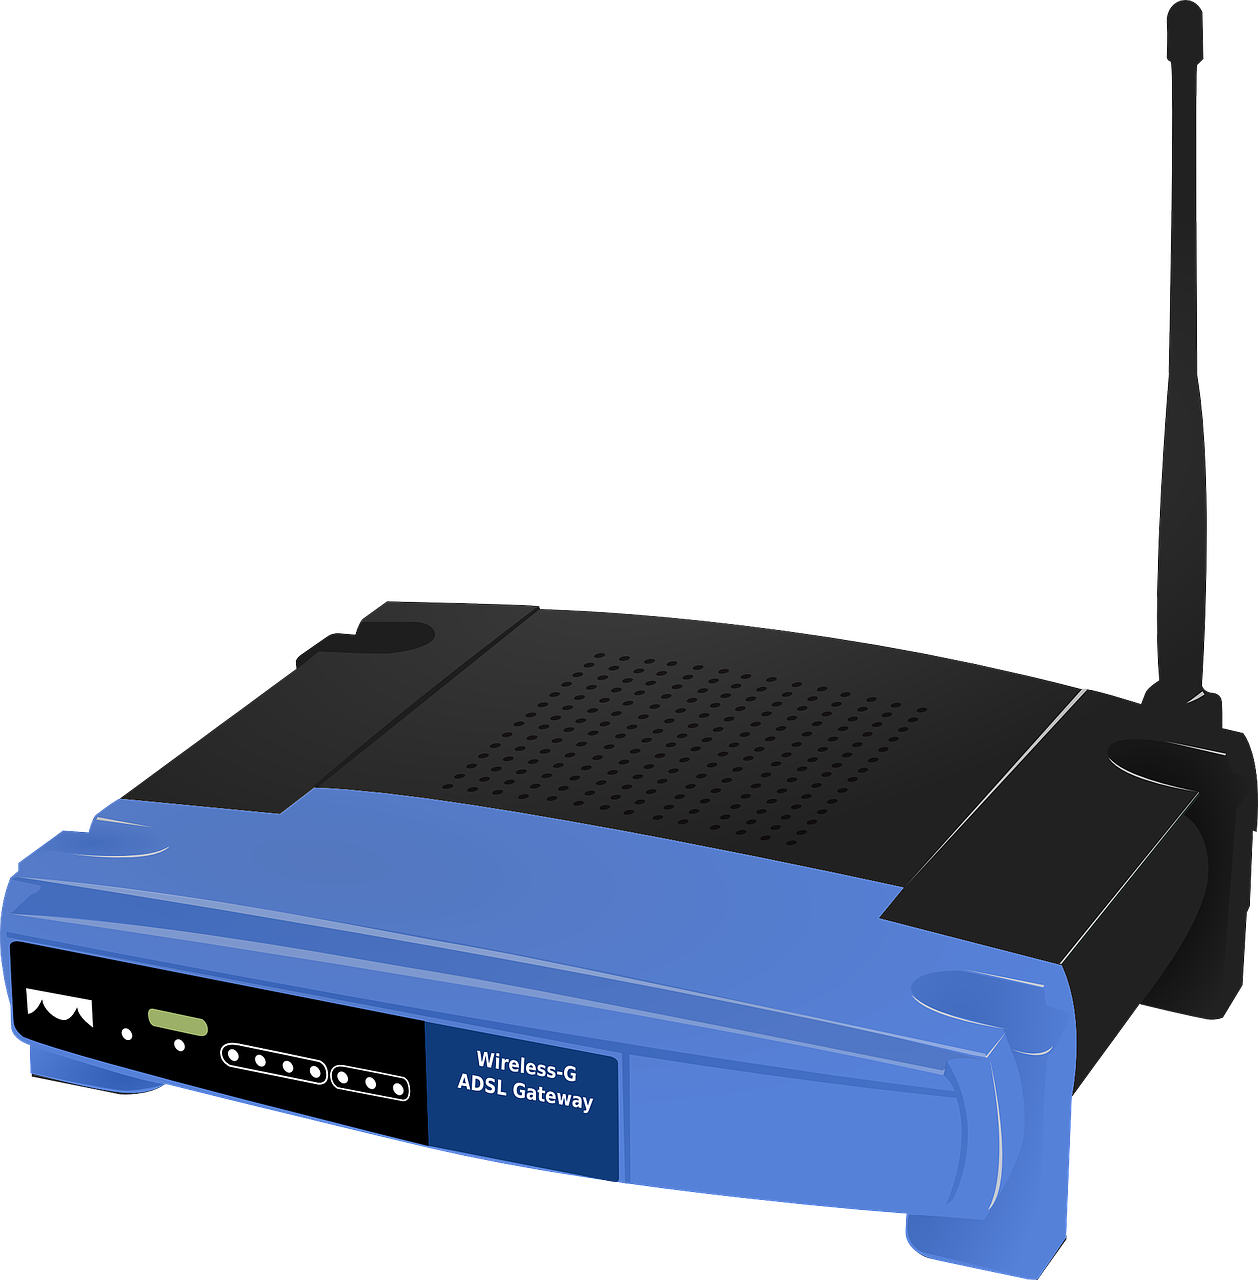 router 29021 1280